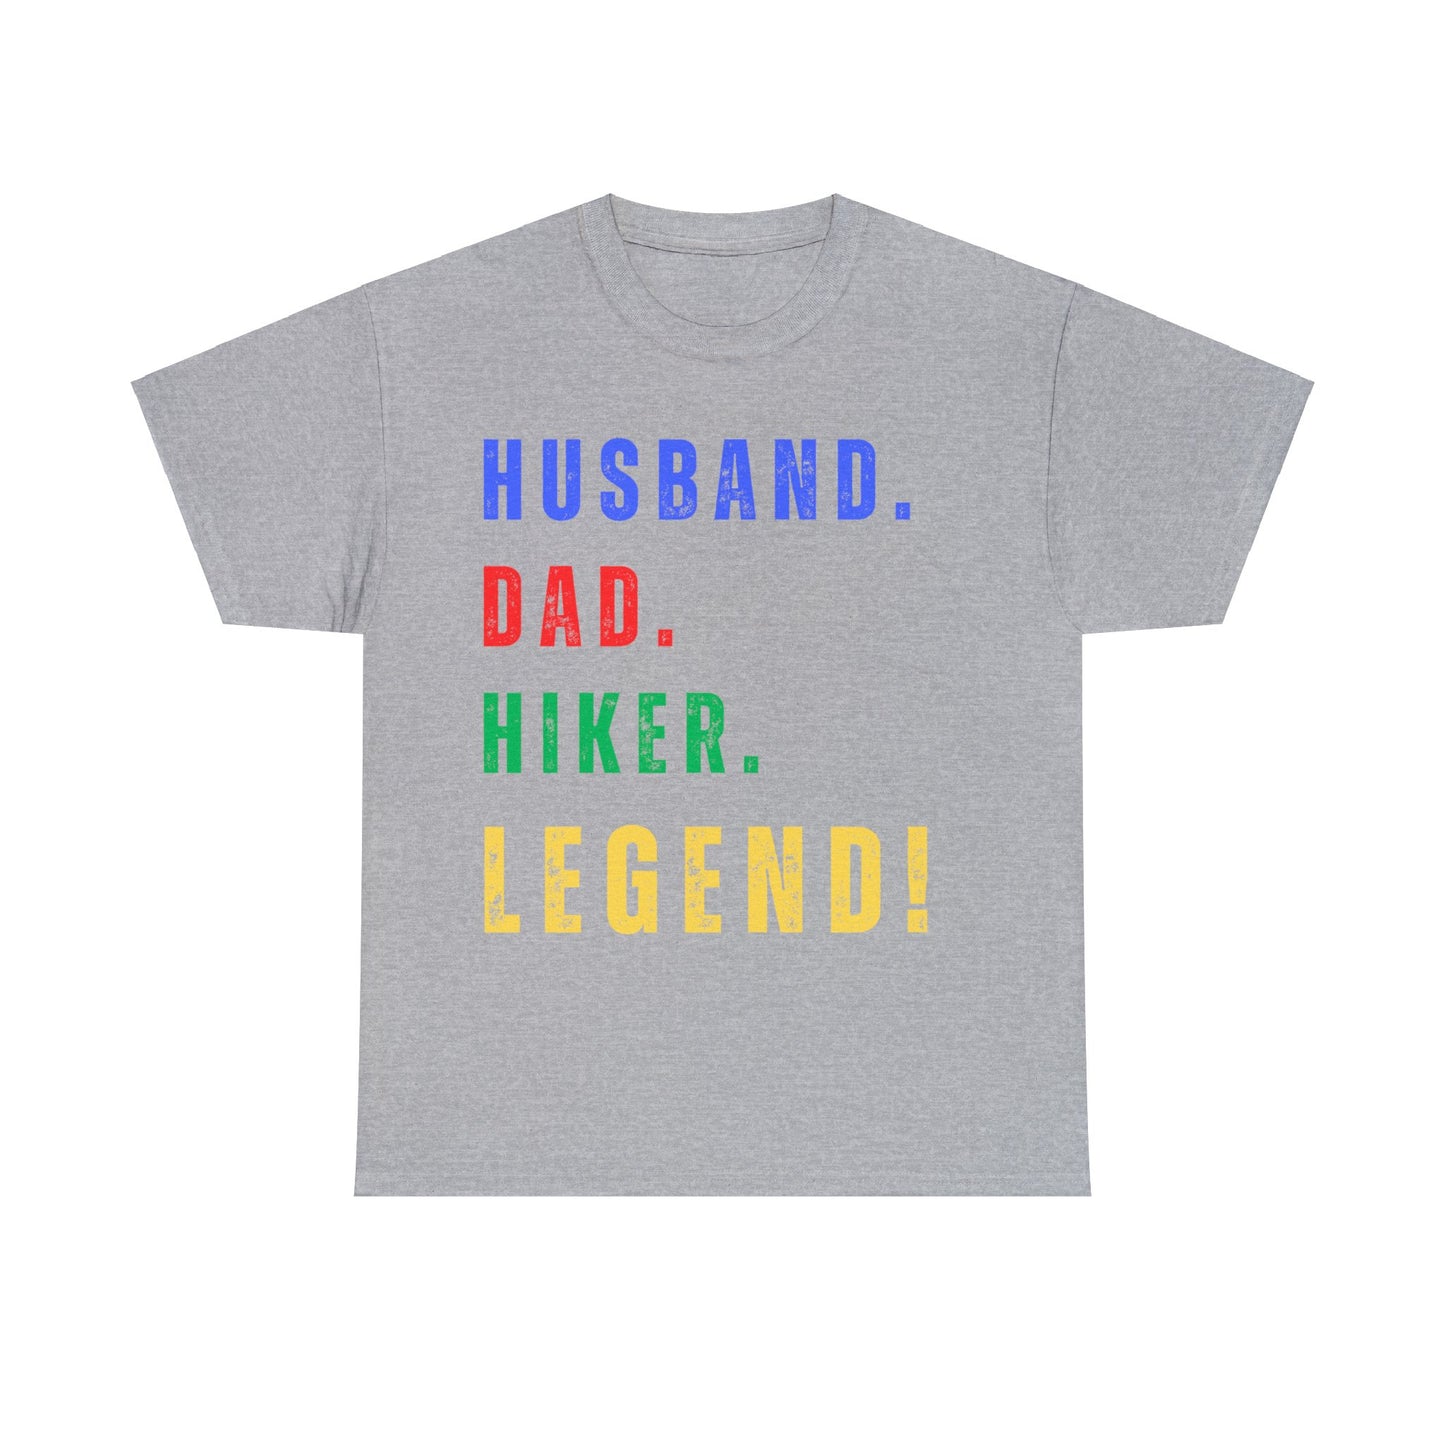 HUSBAND. DAD. HIKER. LEGEND. T-Shirt - UNIQUE GIFT - NOT SOLD IN STORES - Father's Day, Birthday - Hiker, Trekker, Adventurer, Hiking, Trekking, Adventure Lover Express Delivery available